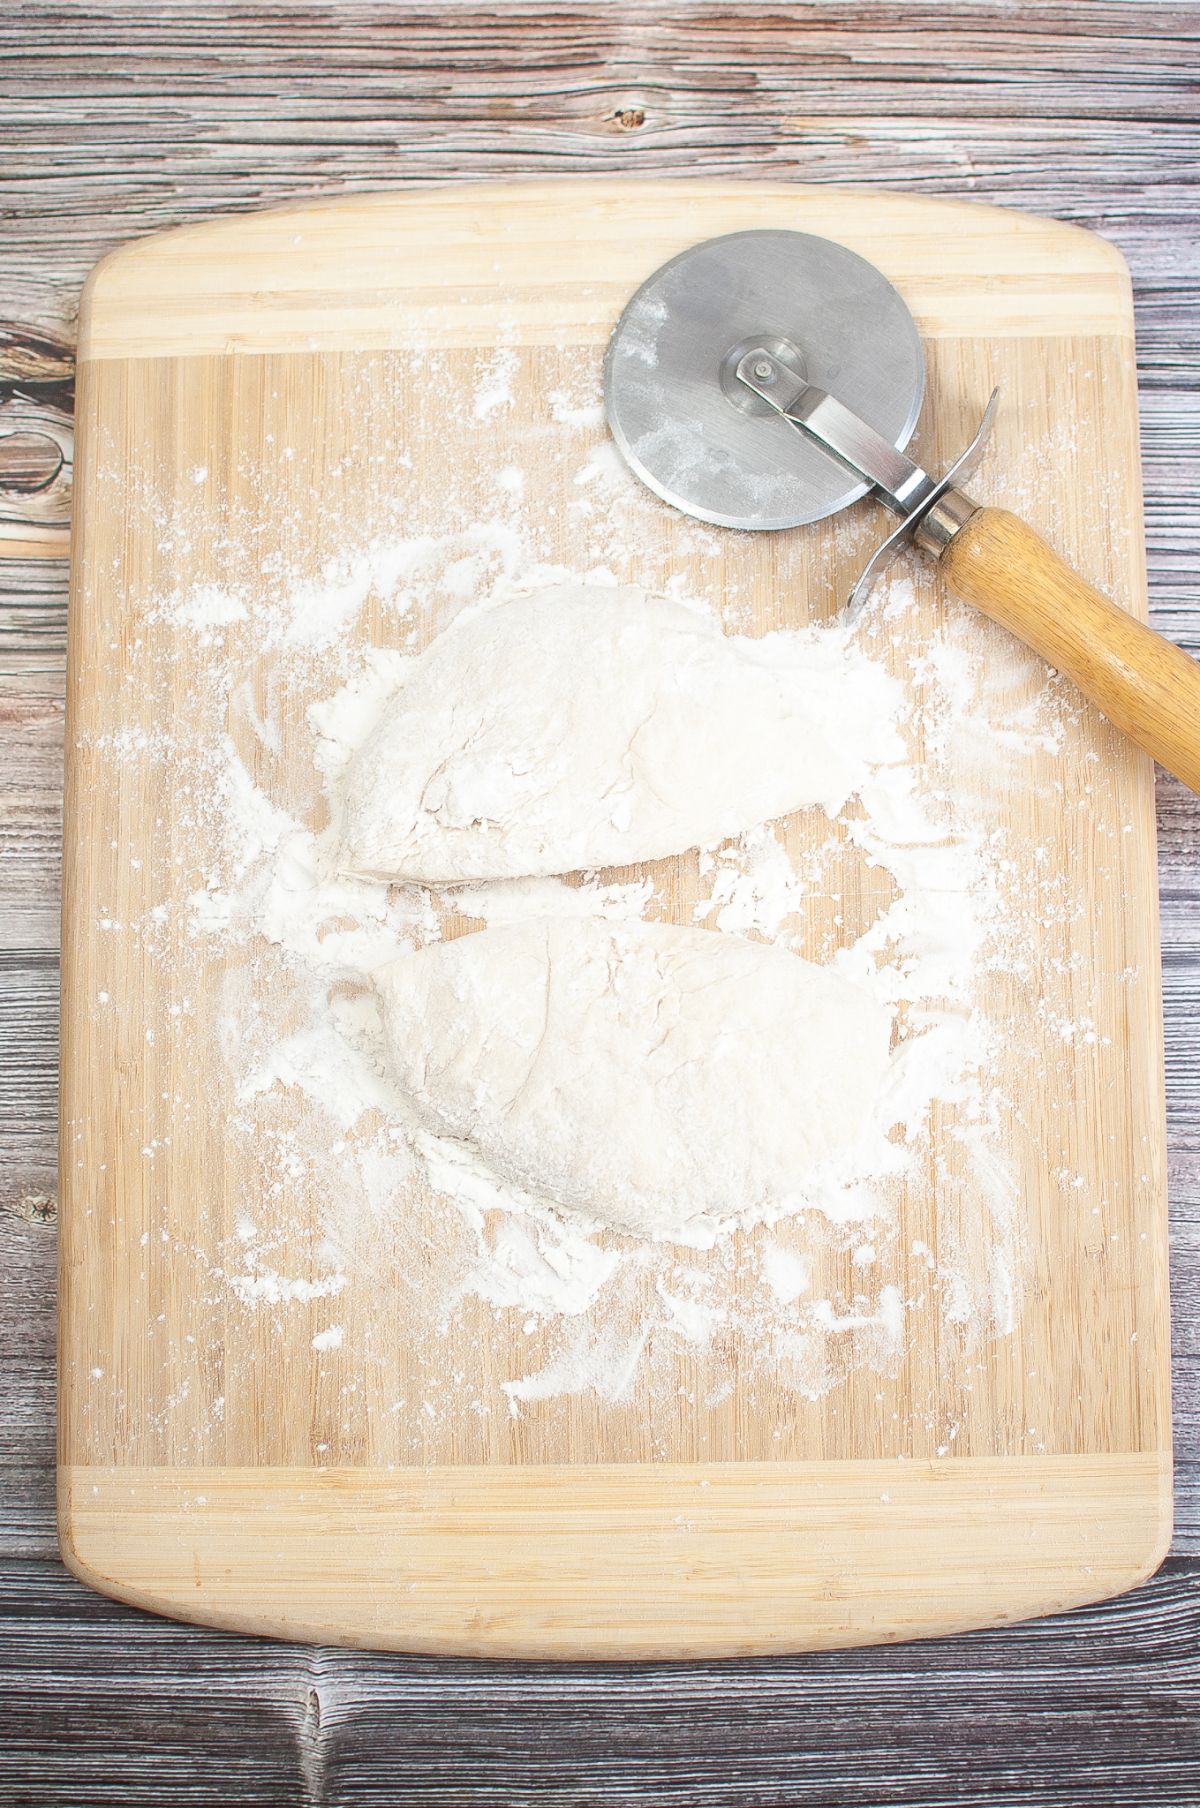 Dough ball divided in two on a wooden board with rolling cutter on the side.